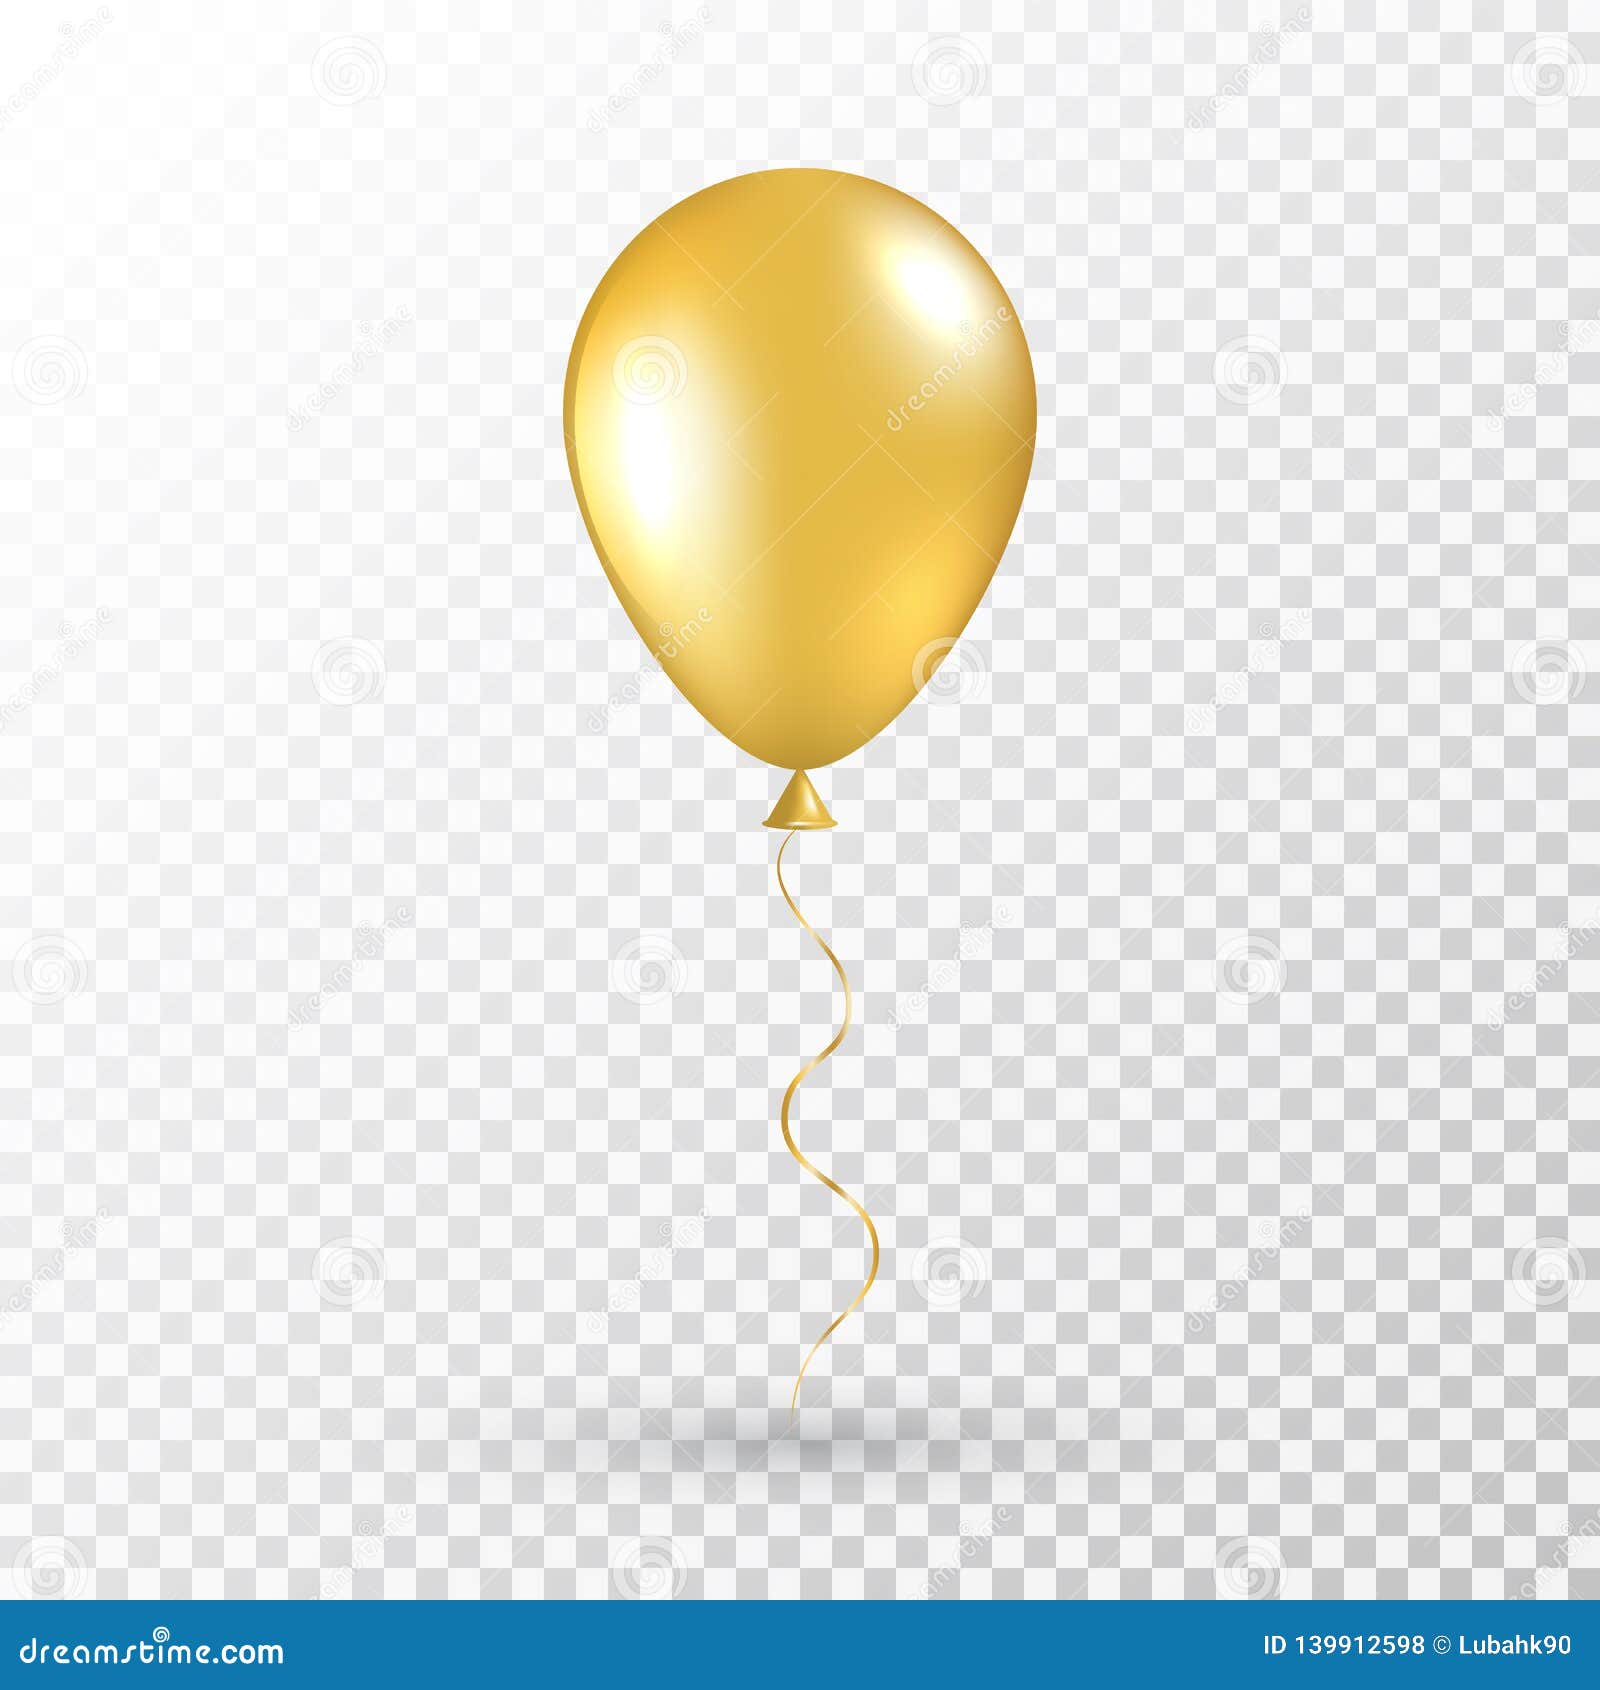 gold balloon on transparent background. realistic air baloon for party, christmas, birthday, valentines day, womens day